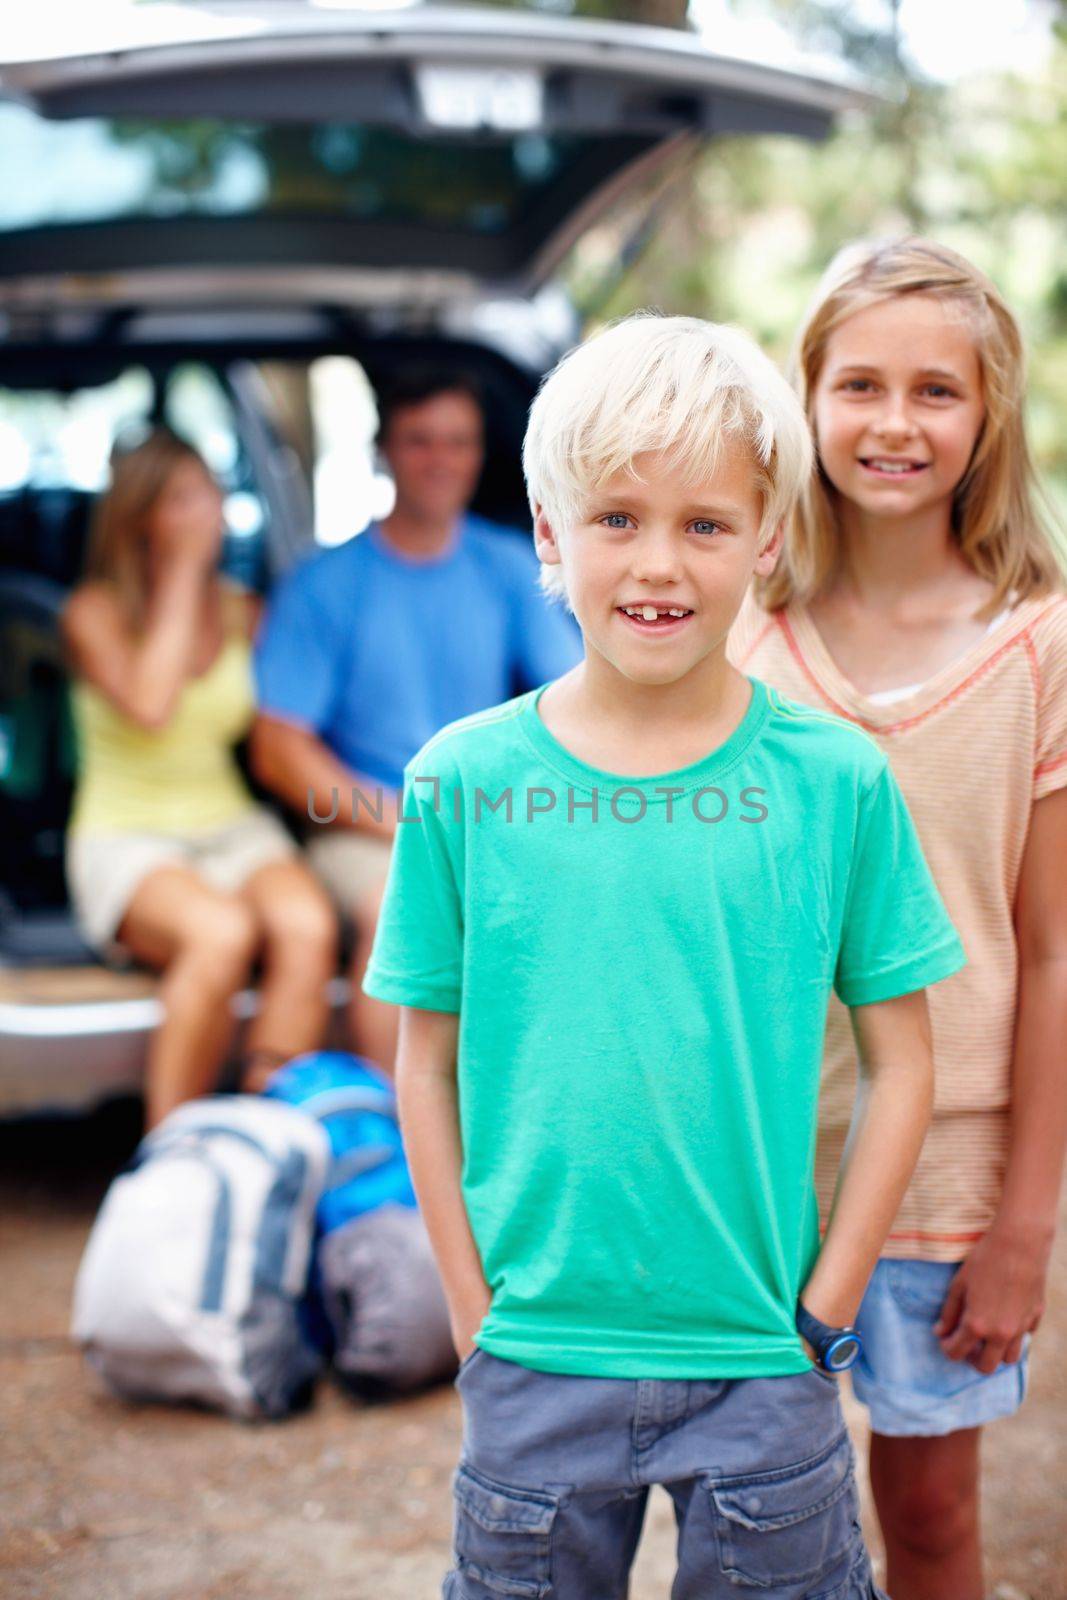 Cute young boy smiling. Portrait of young brother and sister smiling with parents sitting in the car